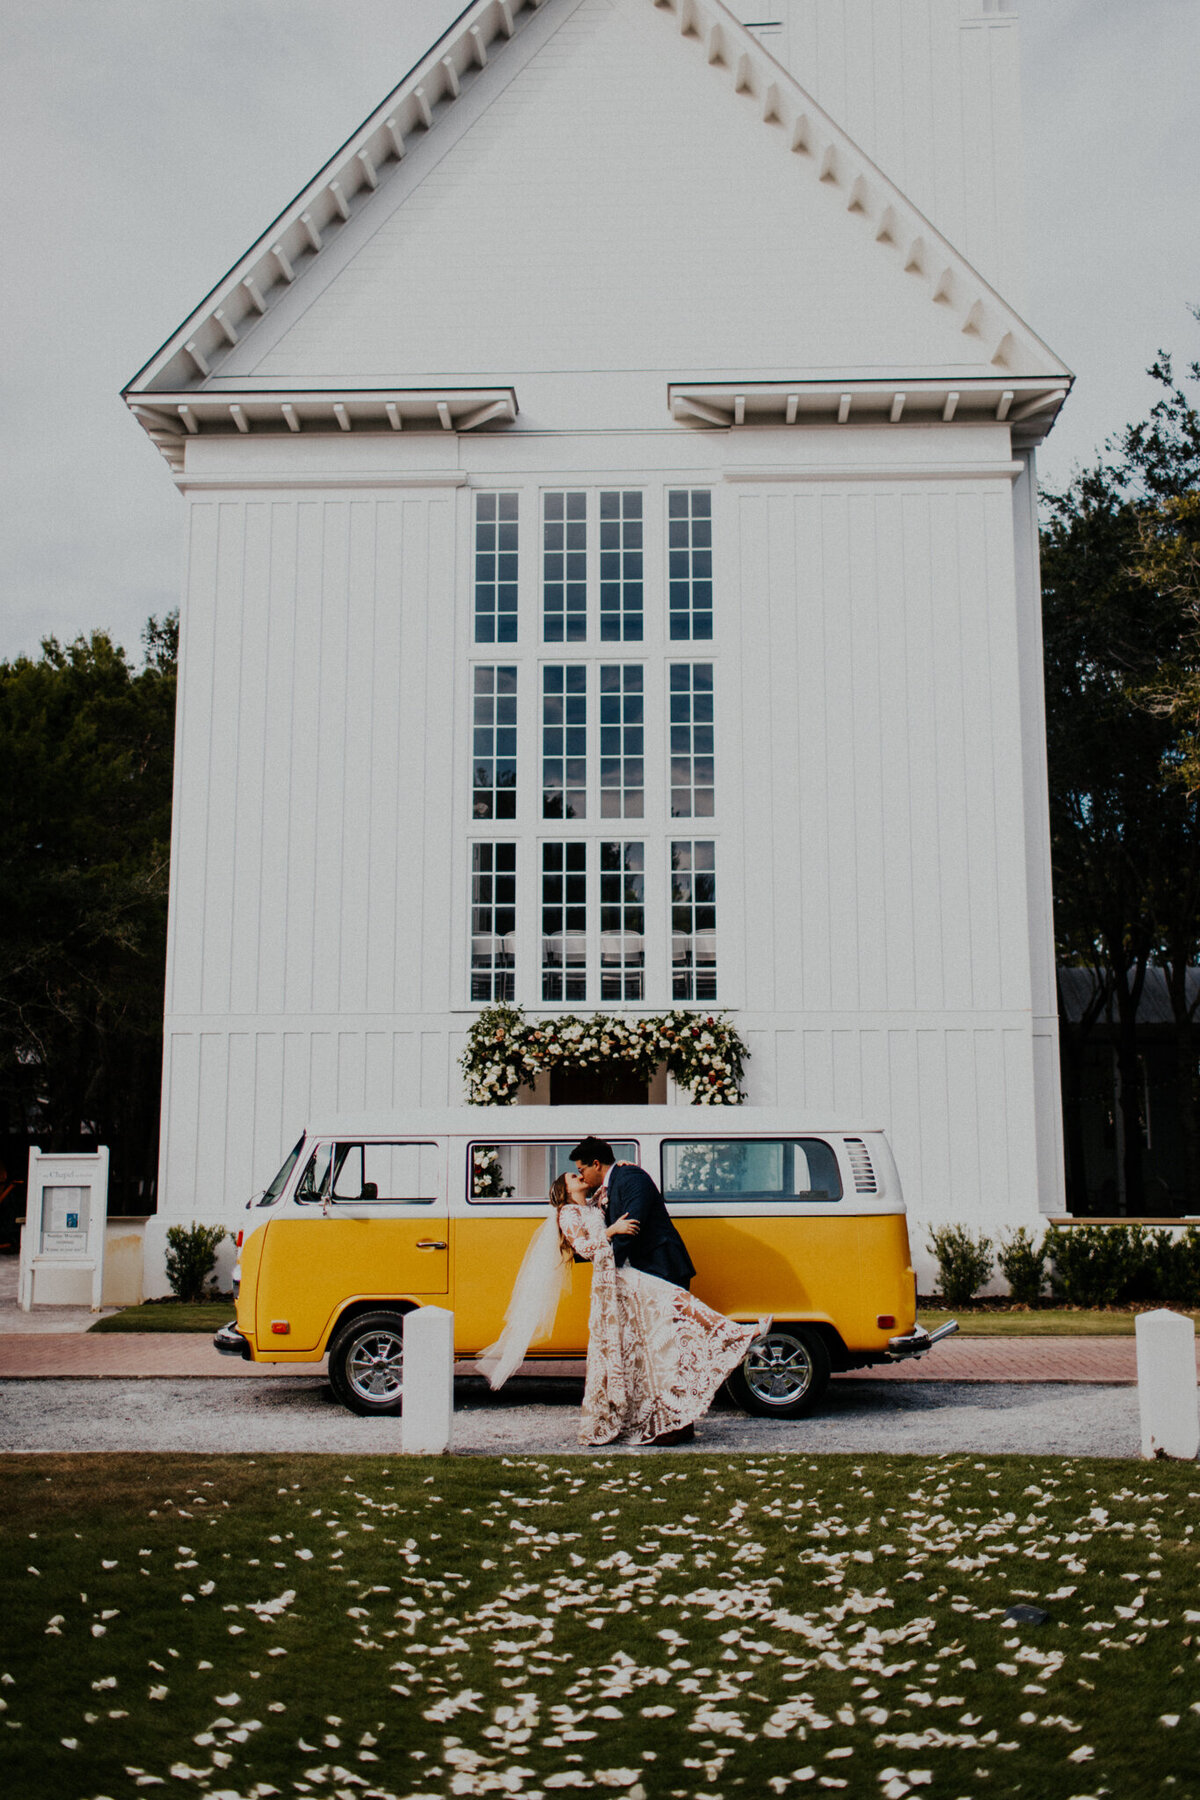 A bride and groom kiss while embracing in front of a yellow vw bus